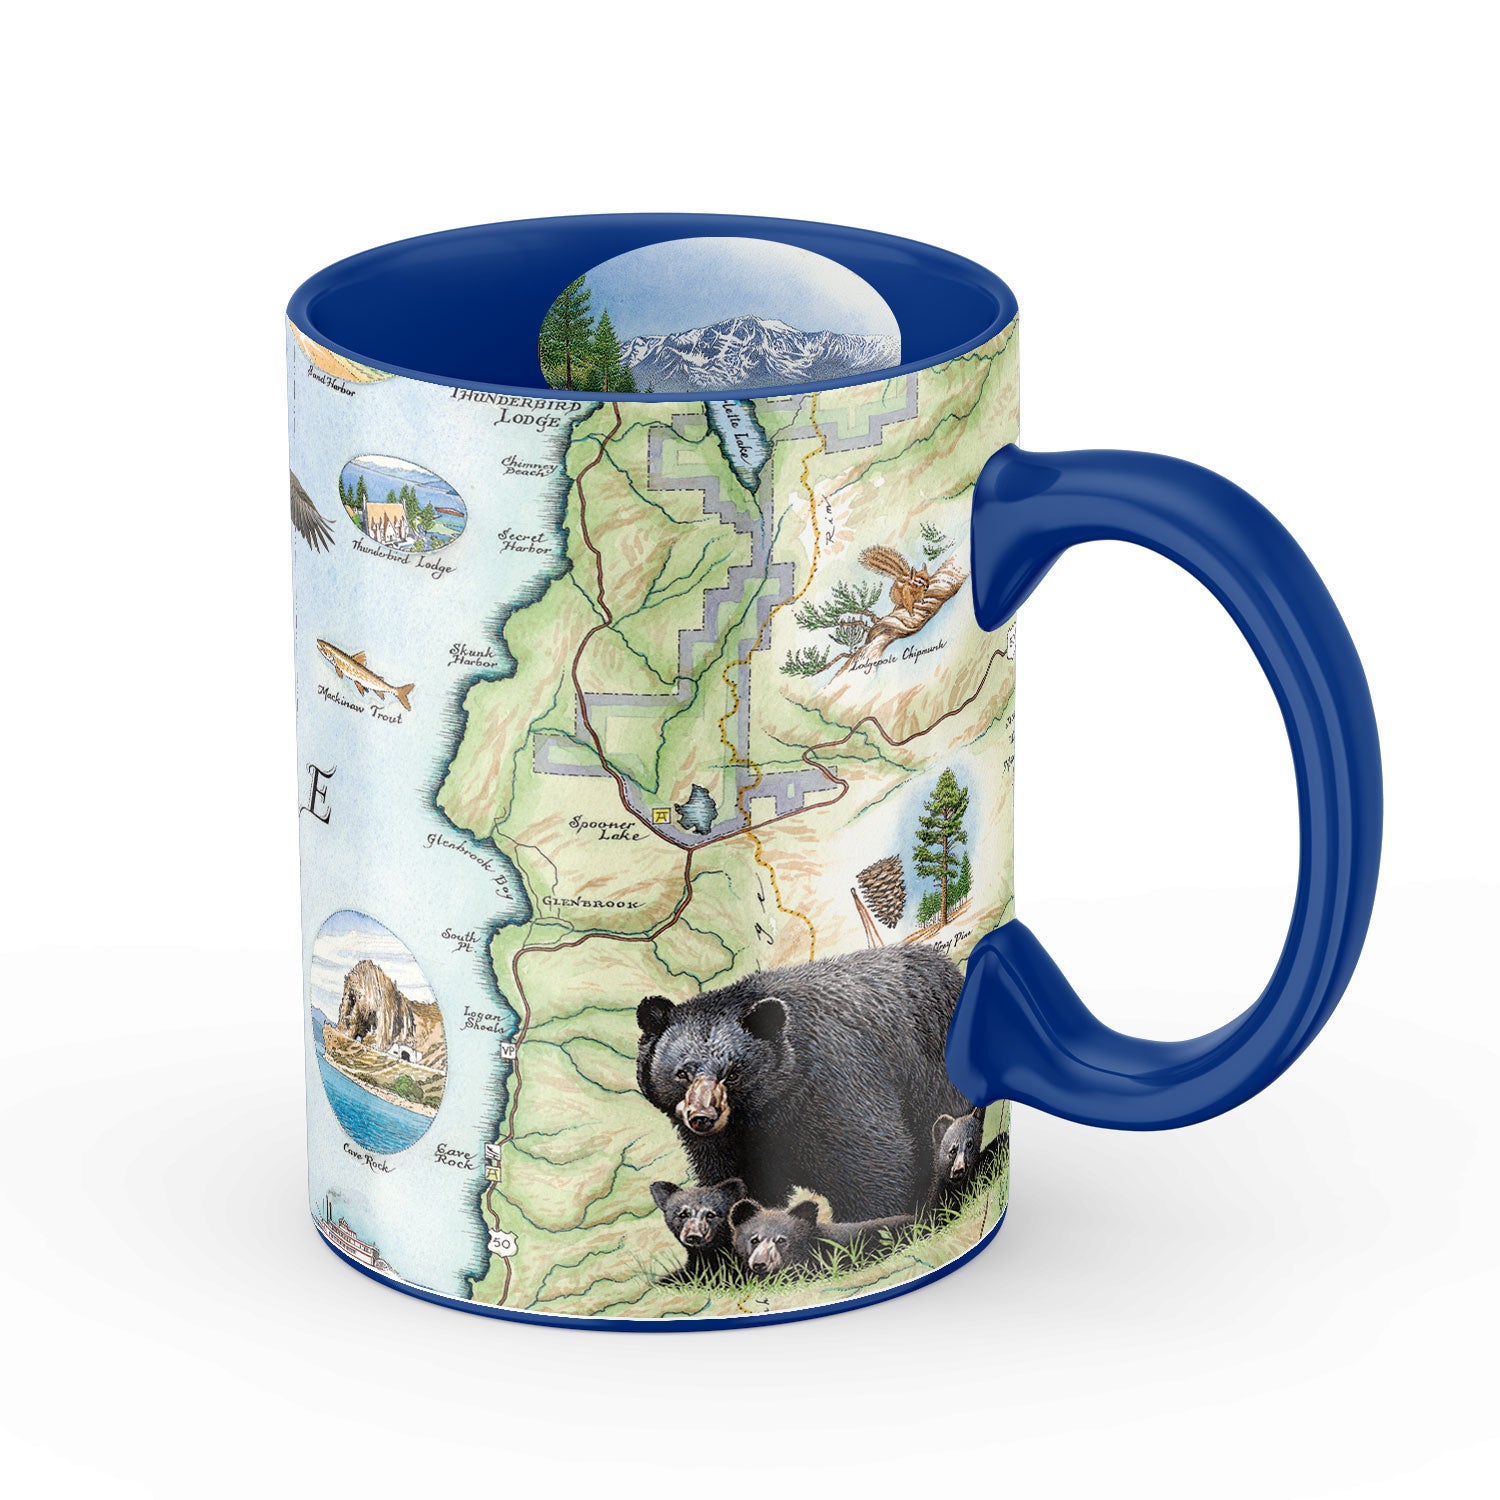 Blue 16 oz Lake Tahoe map ceramic coffee mug. The cup features bear, fish, Emerald Bay State Park, Spooner Lake, Cove Rock, and Thunderbird Lodge.